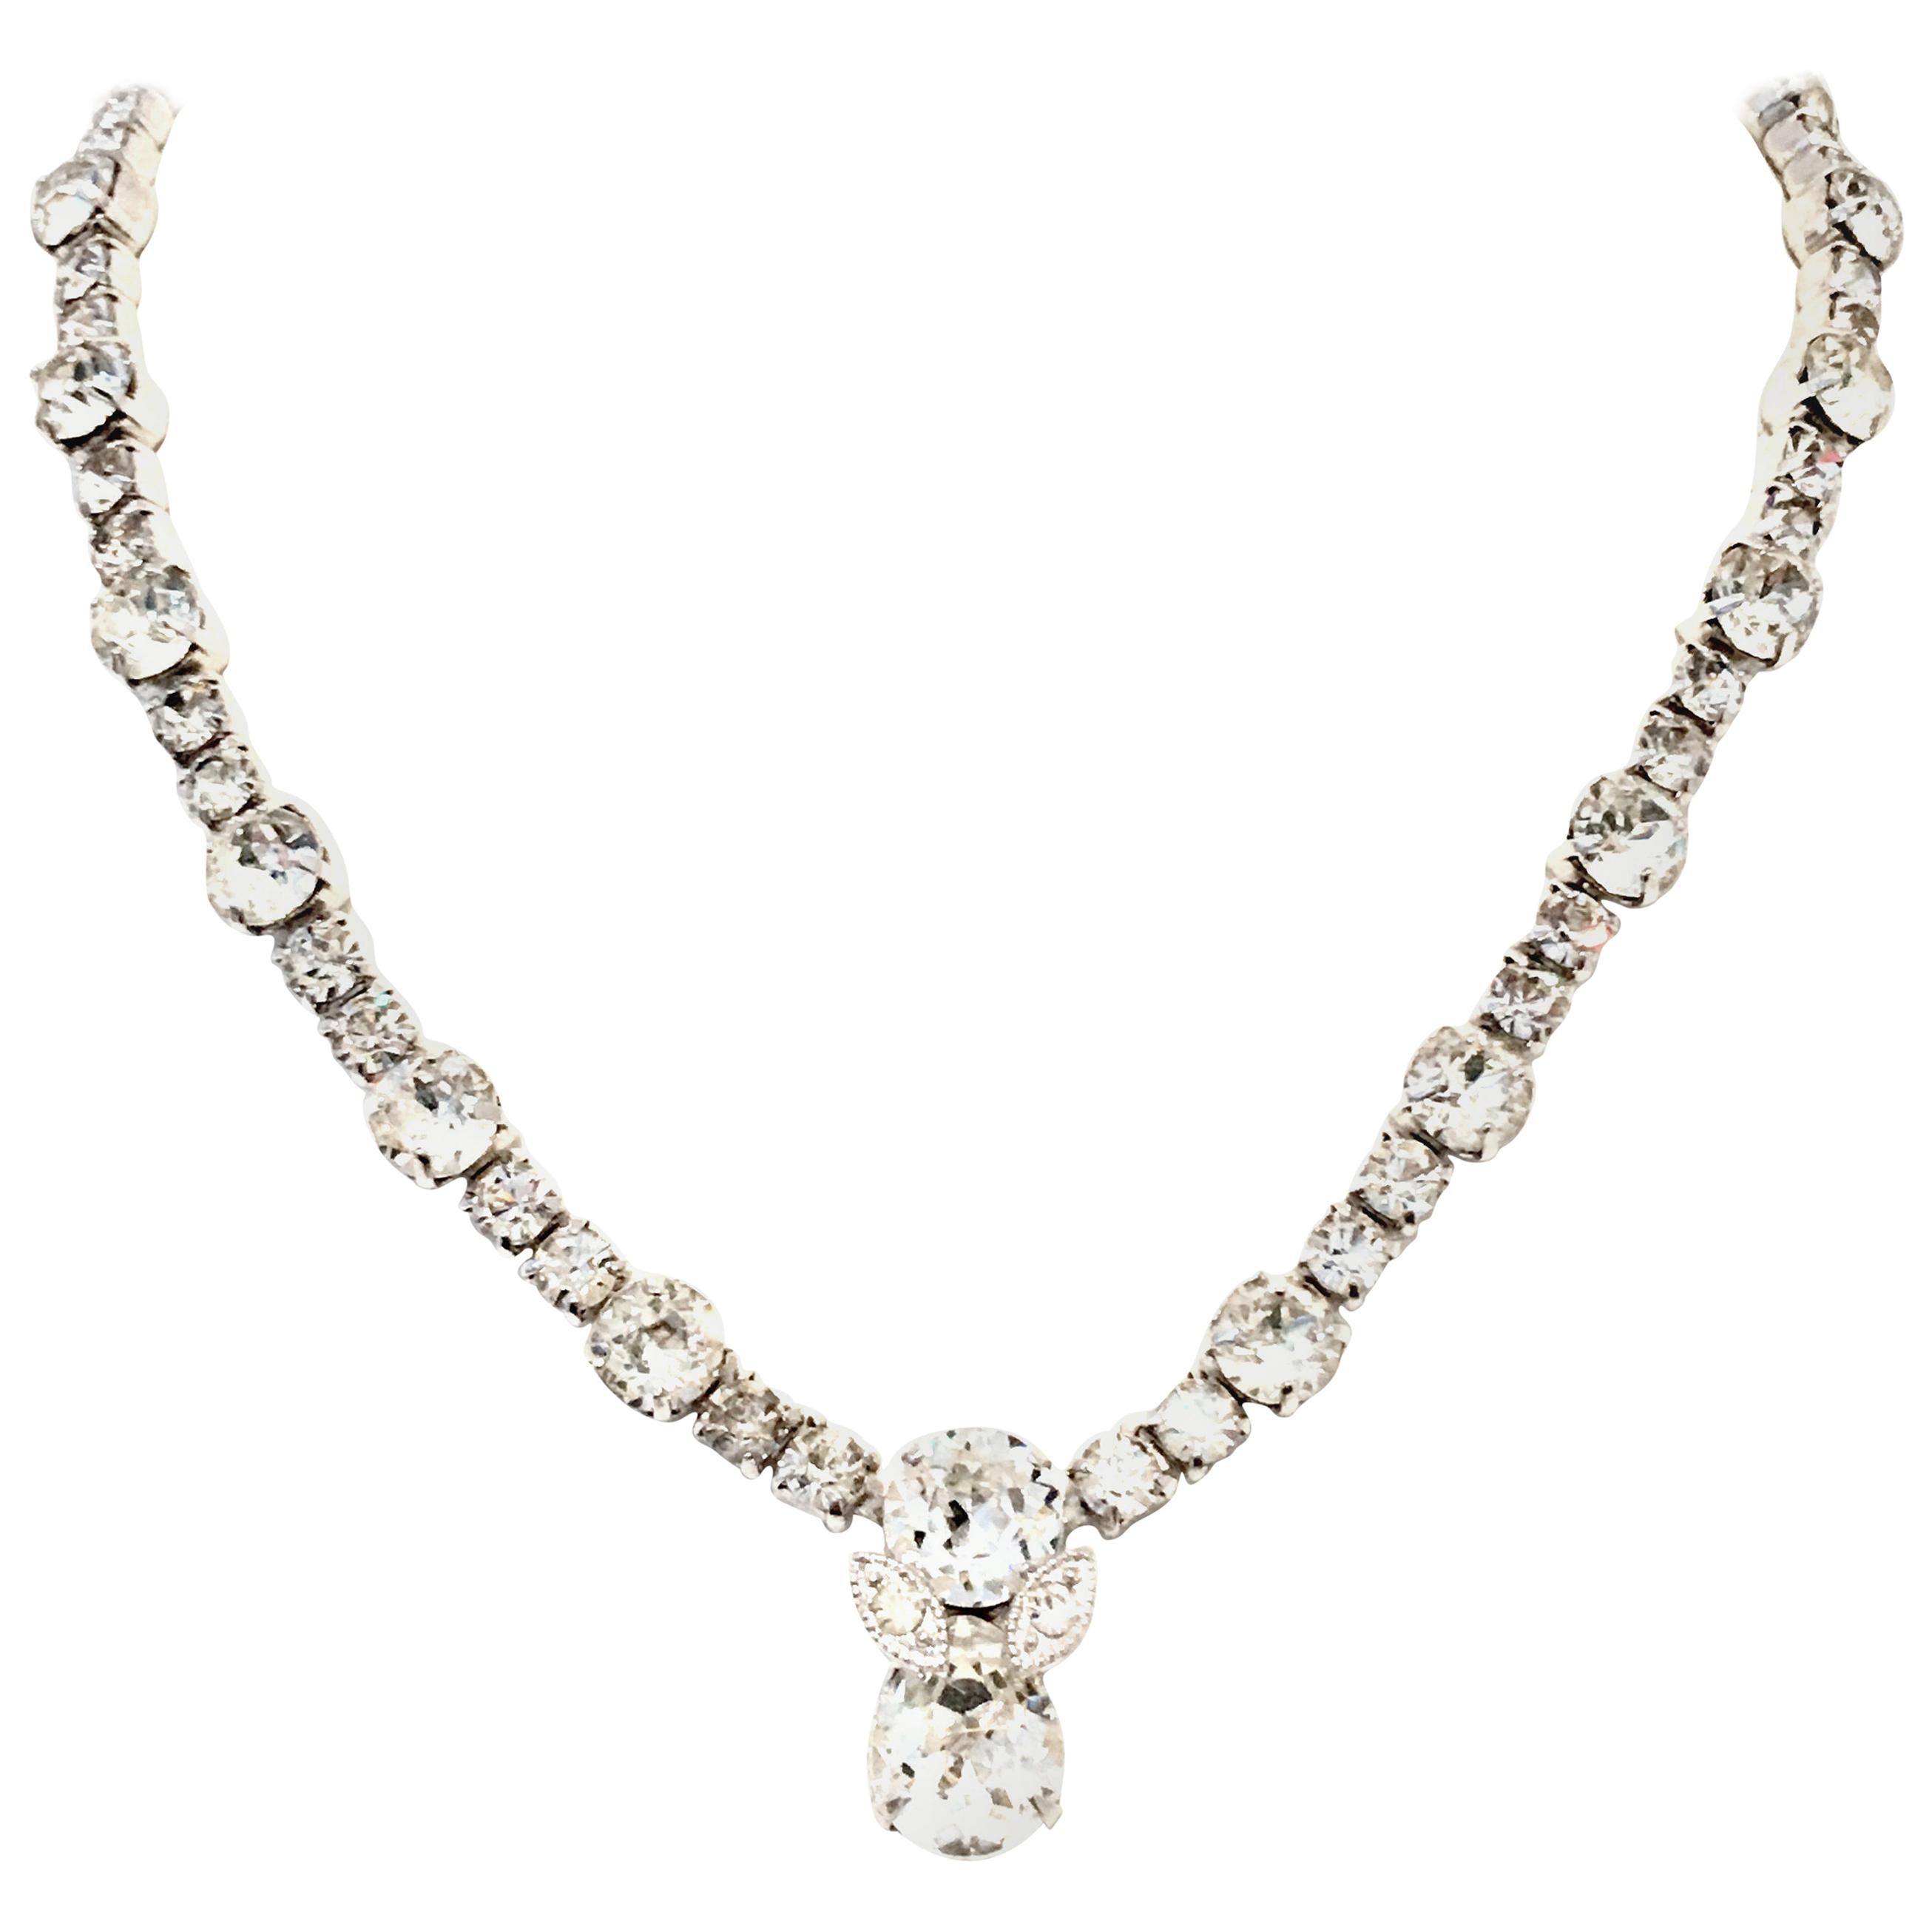 20th Century Silver & Swarovski Crystal Choker Style Necklace By, Eisenberg For Sale